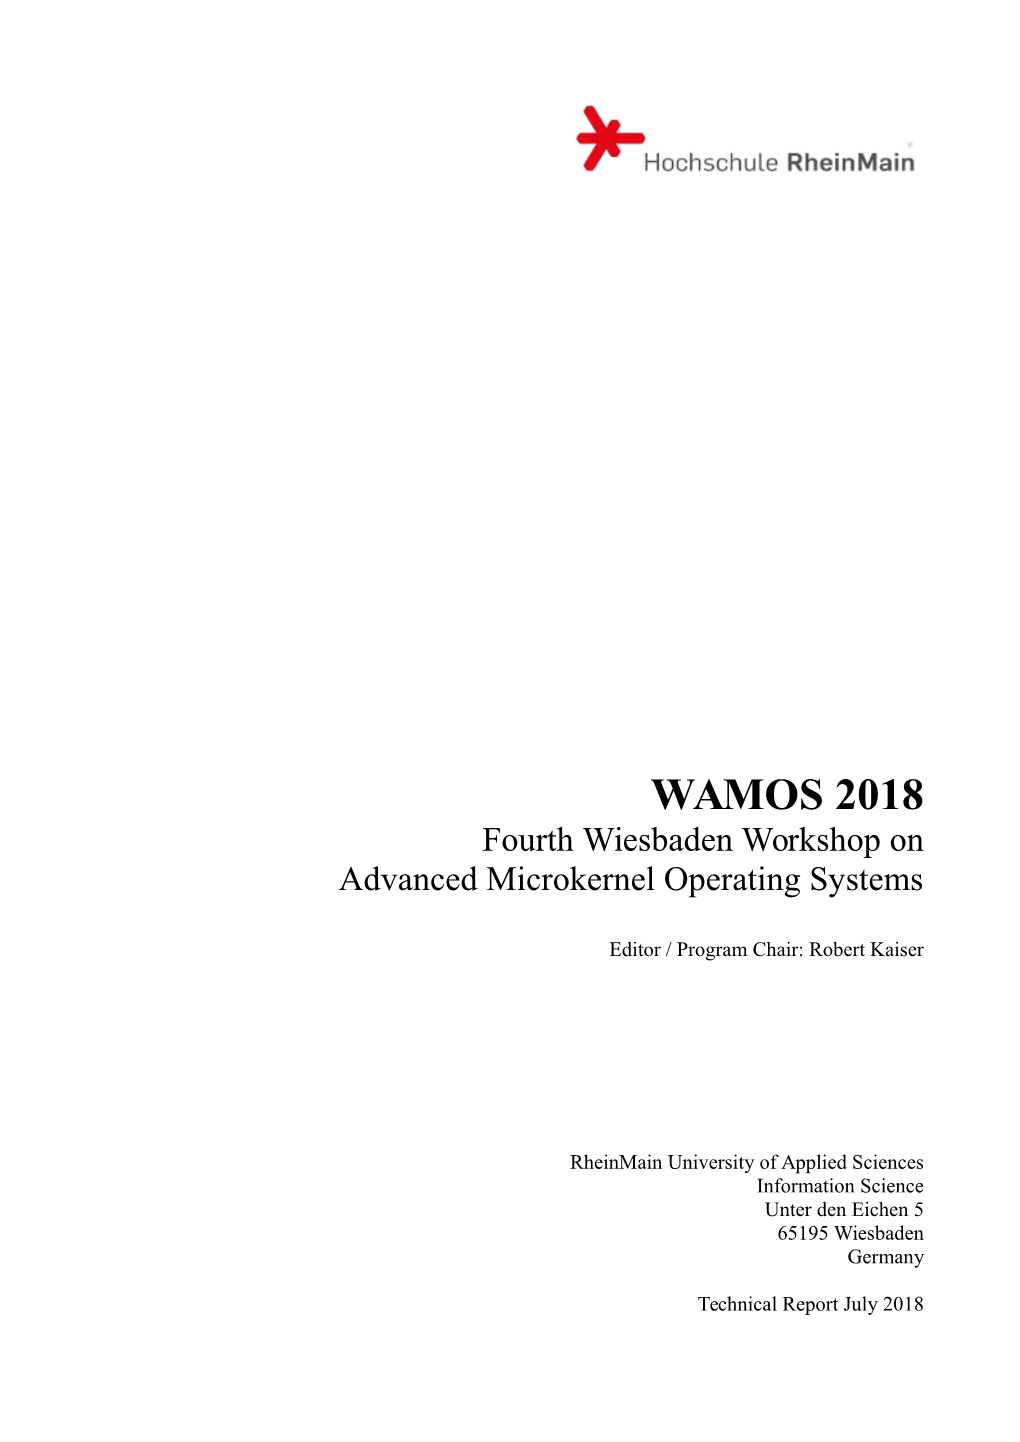 WAMOS 2018 Fourth Wiesbaden Workshop on Advanced Microkernel Operating Systems